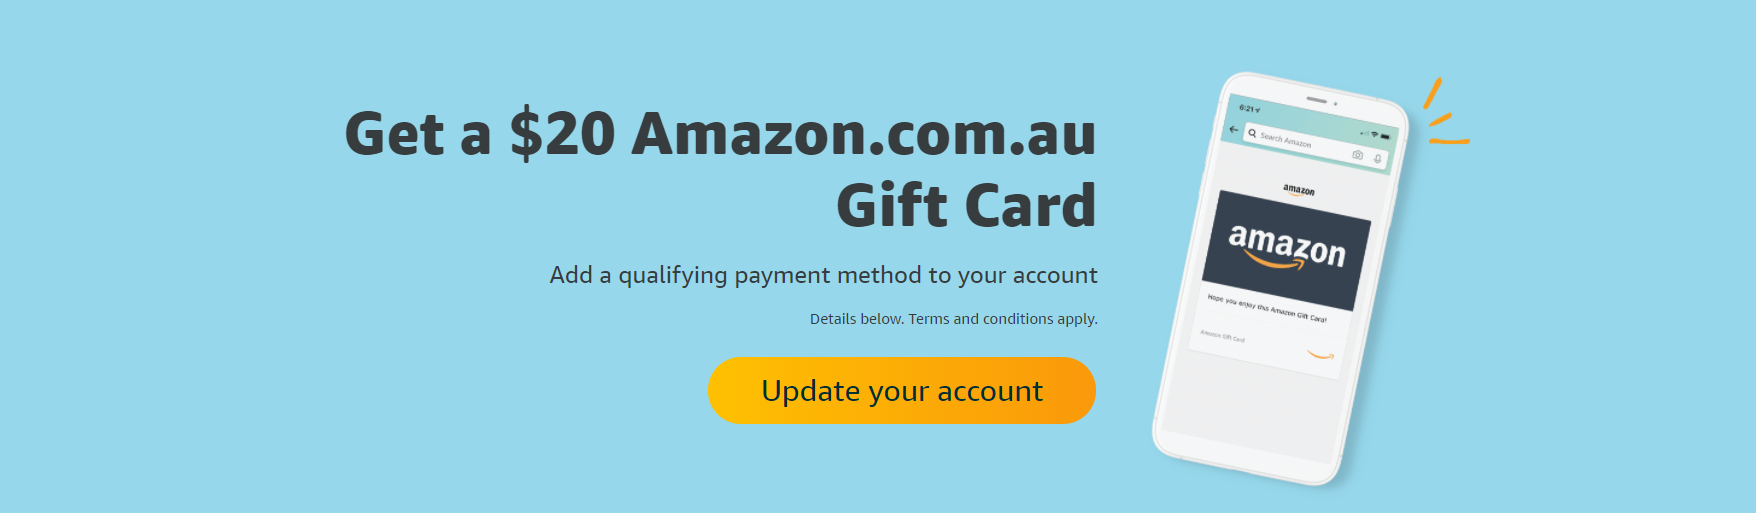 Get a $20 Amazon.com.au Gift Card when you add a payment method